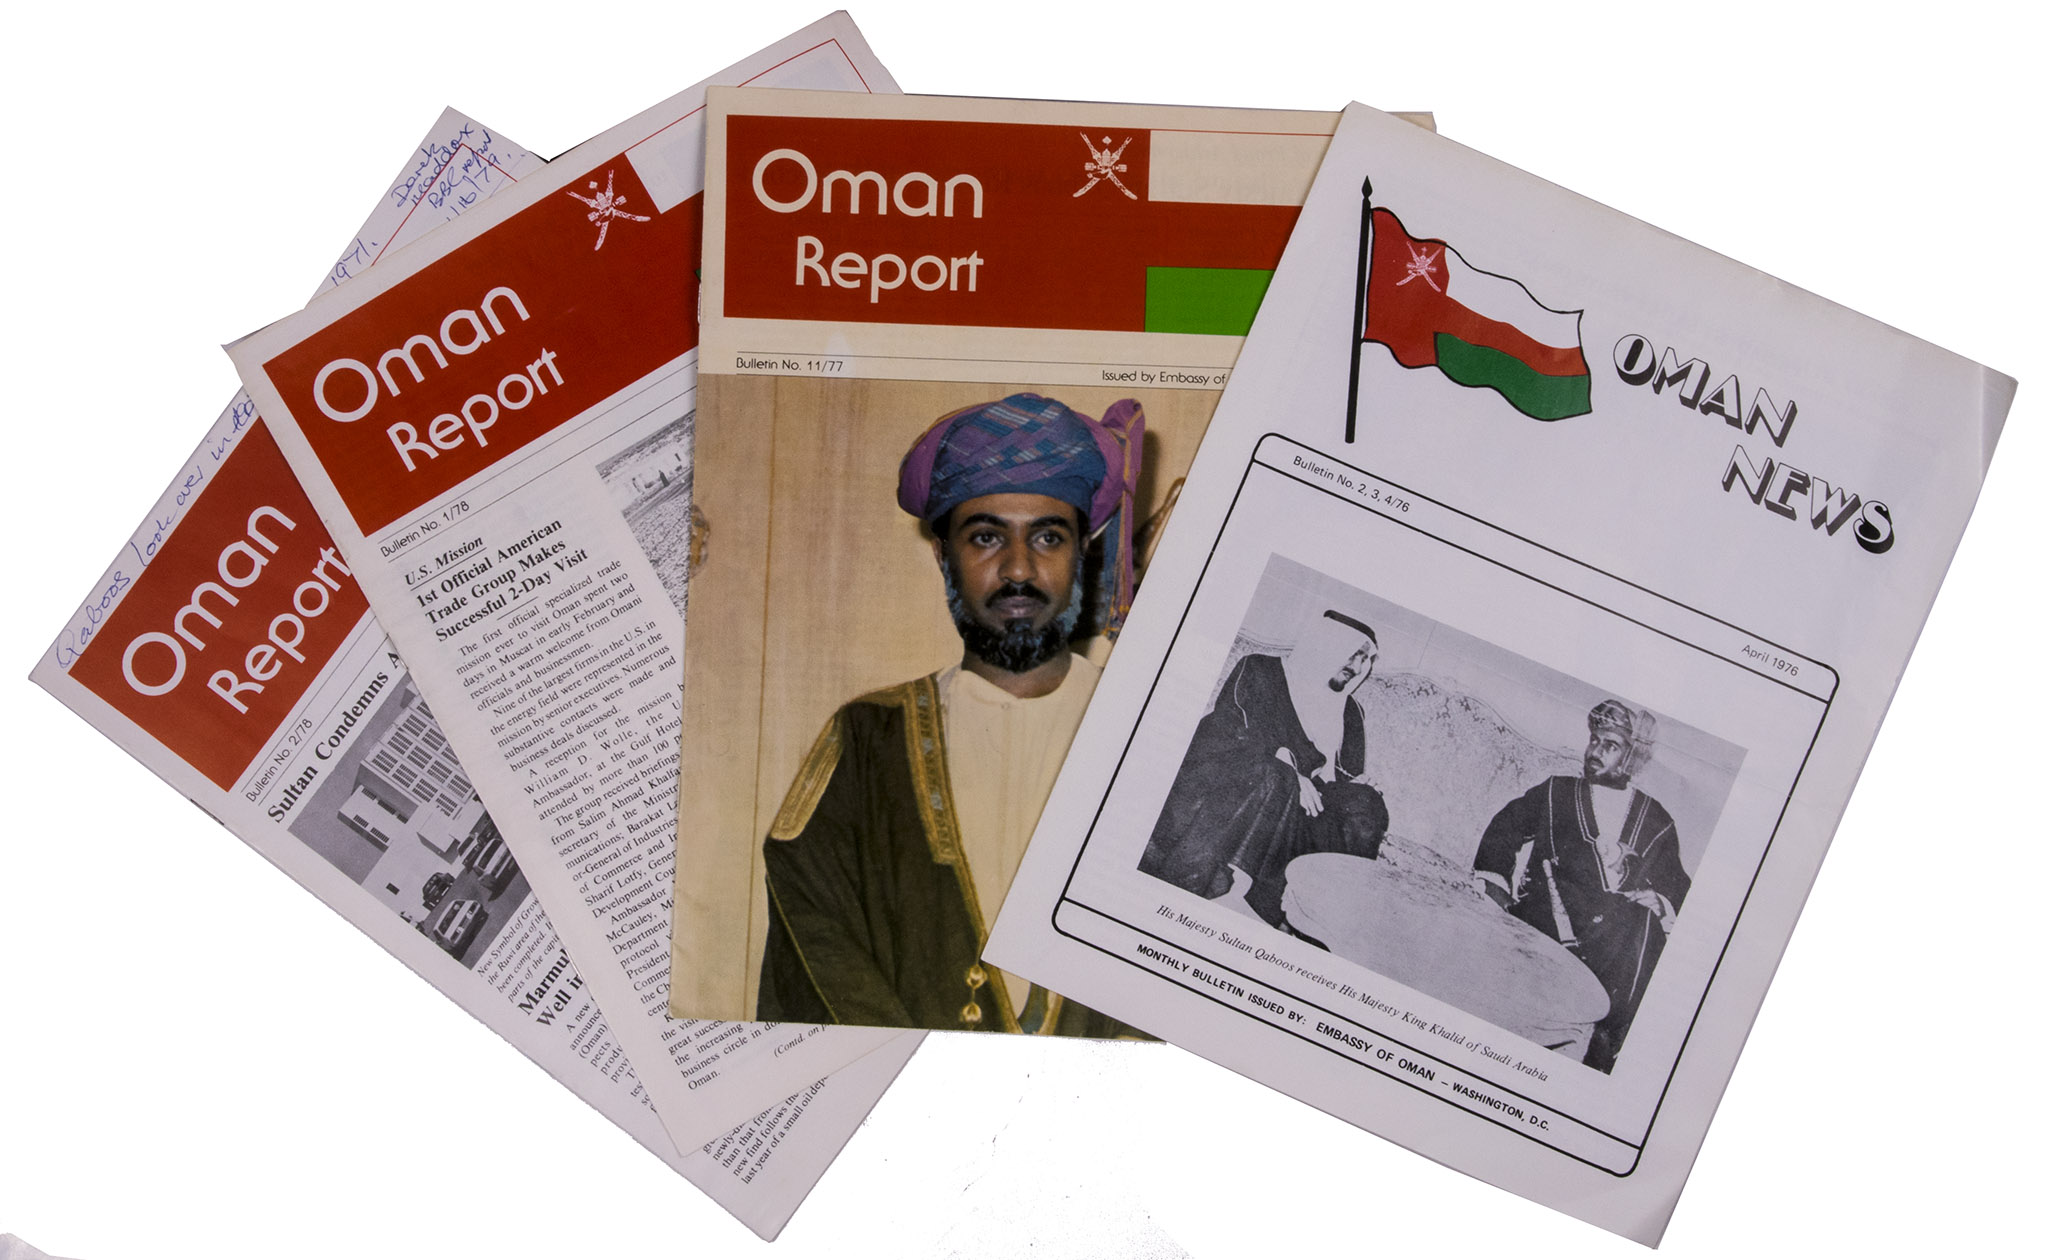 [OMAN]. - Oman news.With: Oman report.Washington, D.C., Embassy of Oman, 1976-1978. 4to. One issue of the Oman News and three issue of the Oman Report.